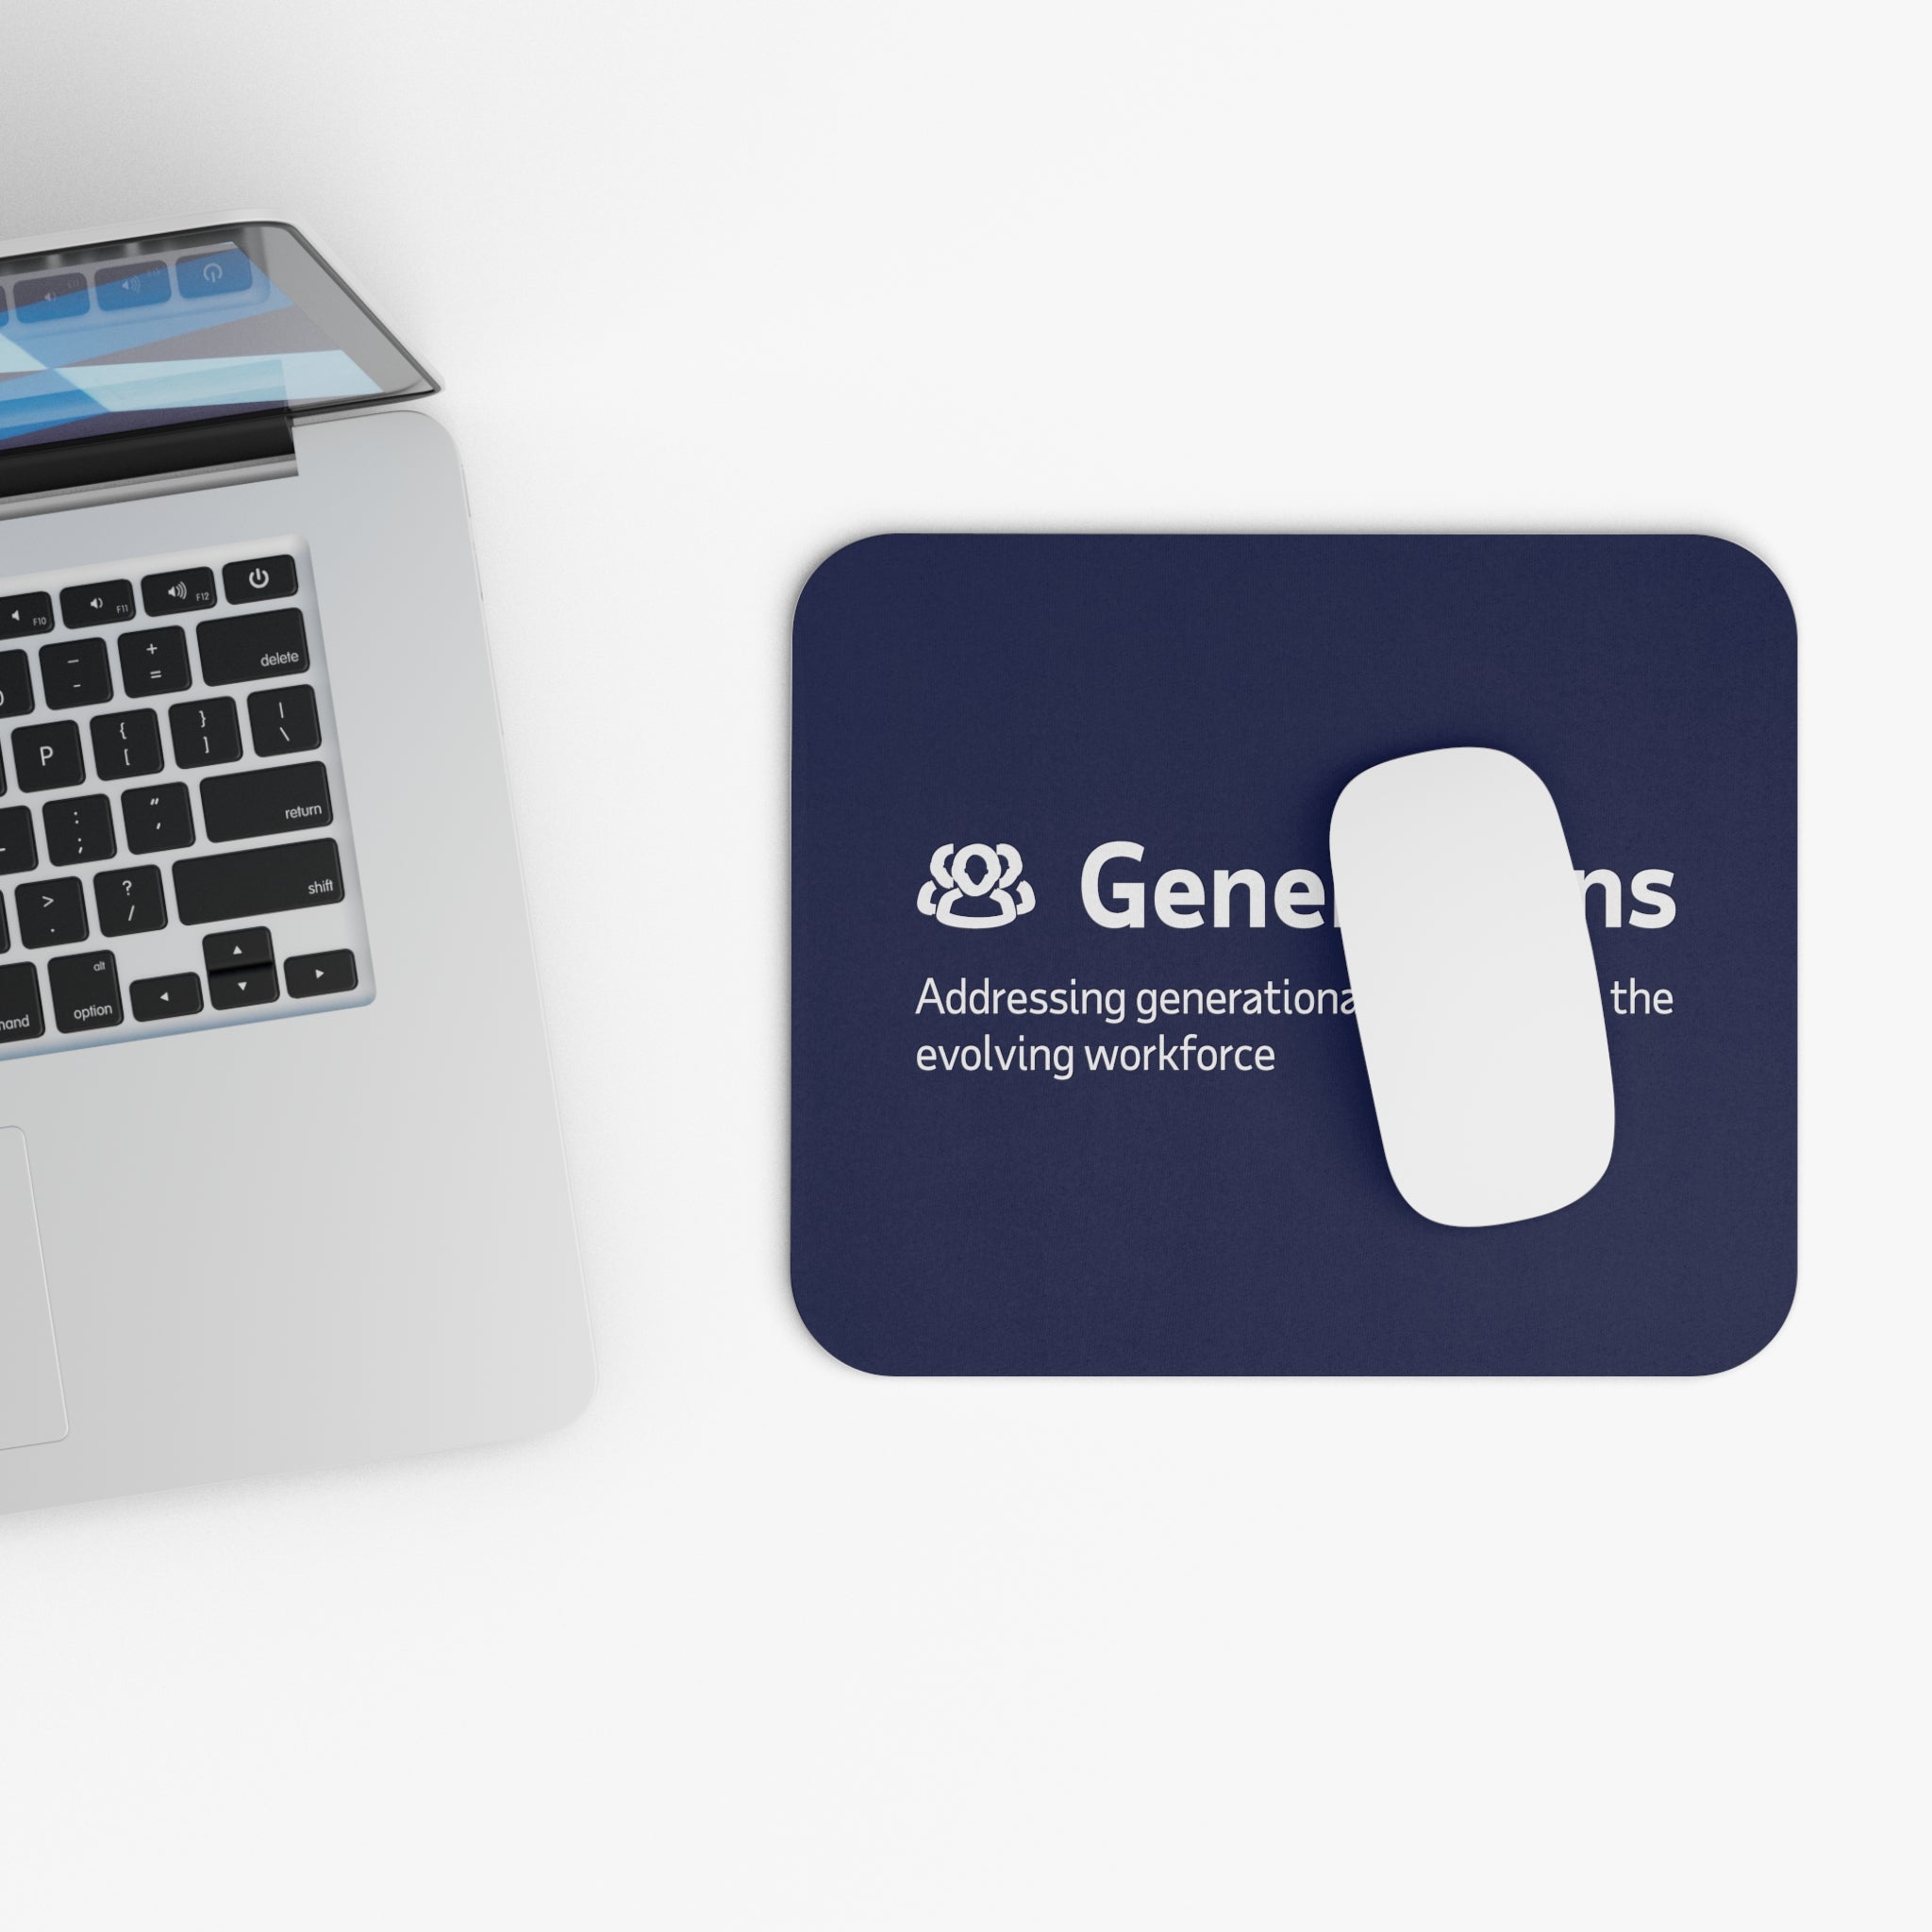 Generations BRG Mouse Pad (Rectangle)